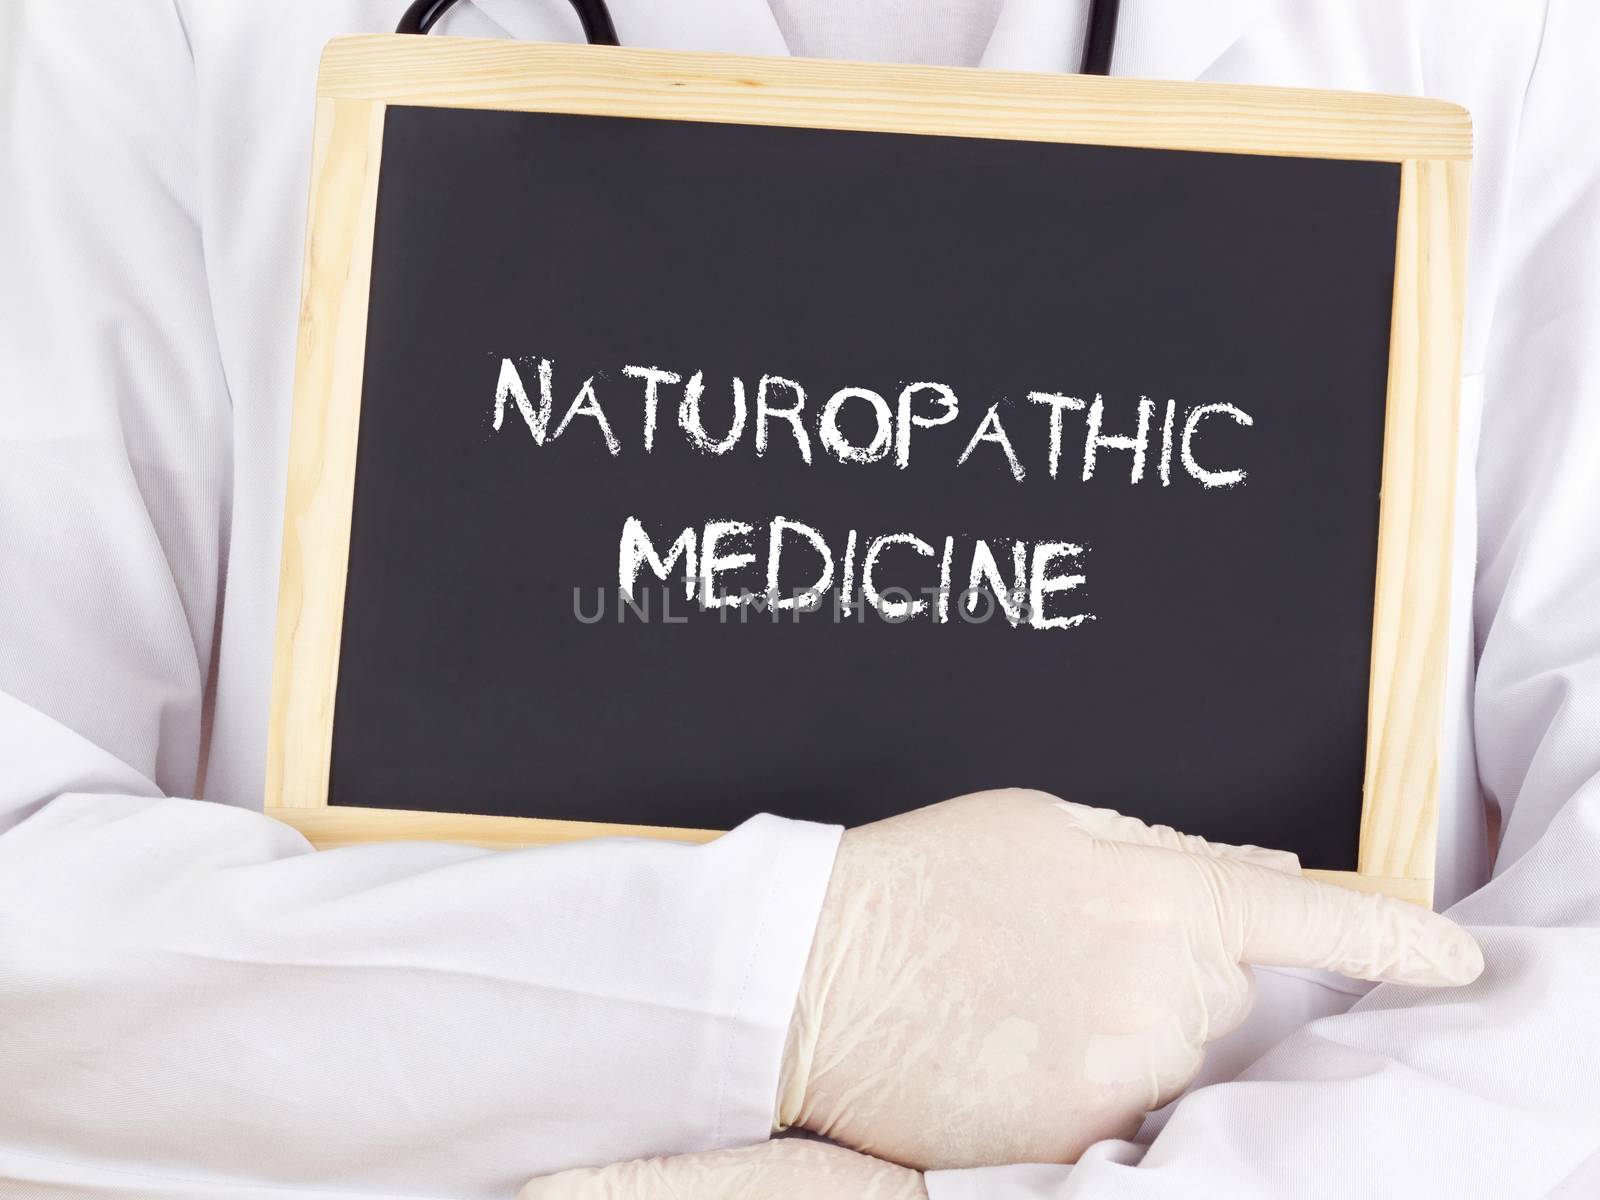 Doctor shows information: naturopathic medicine